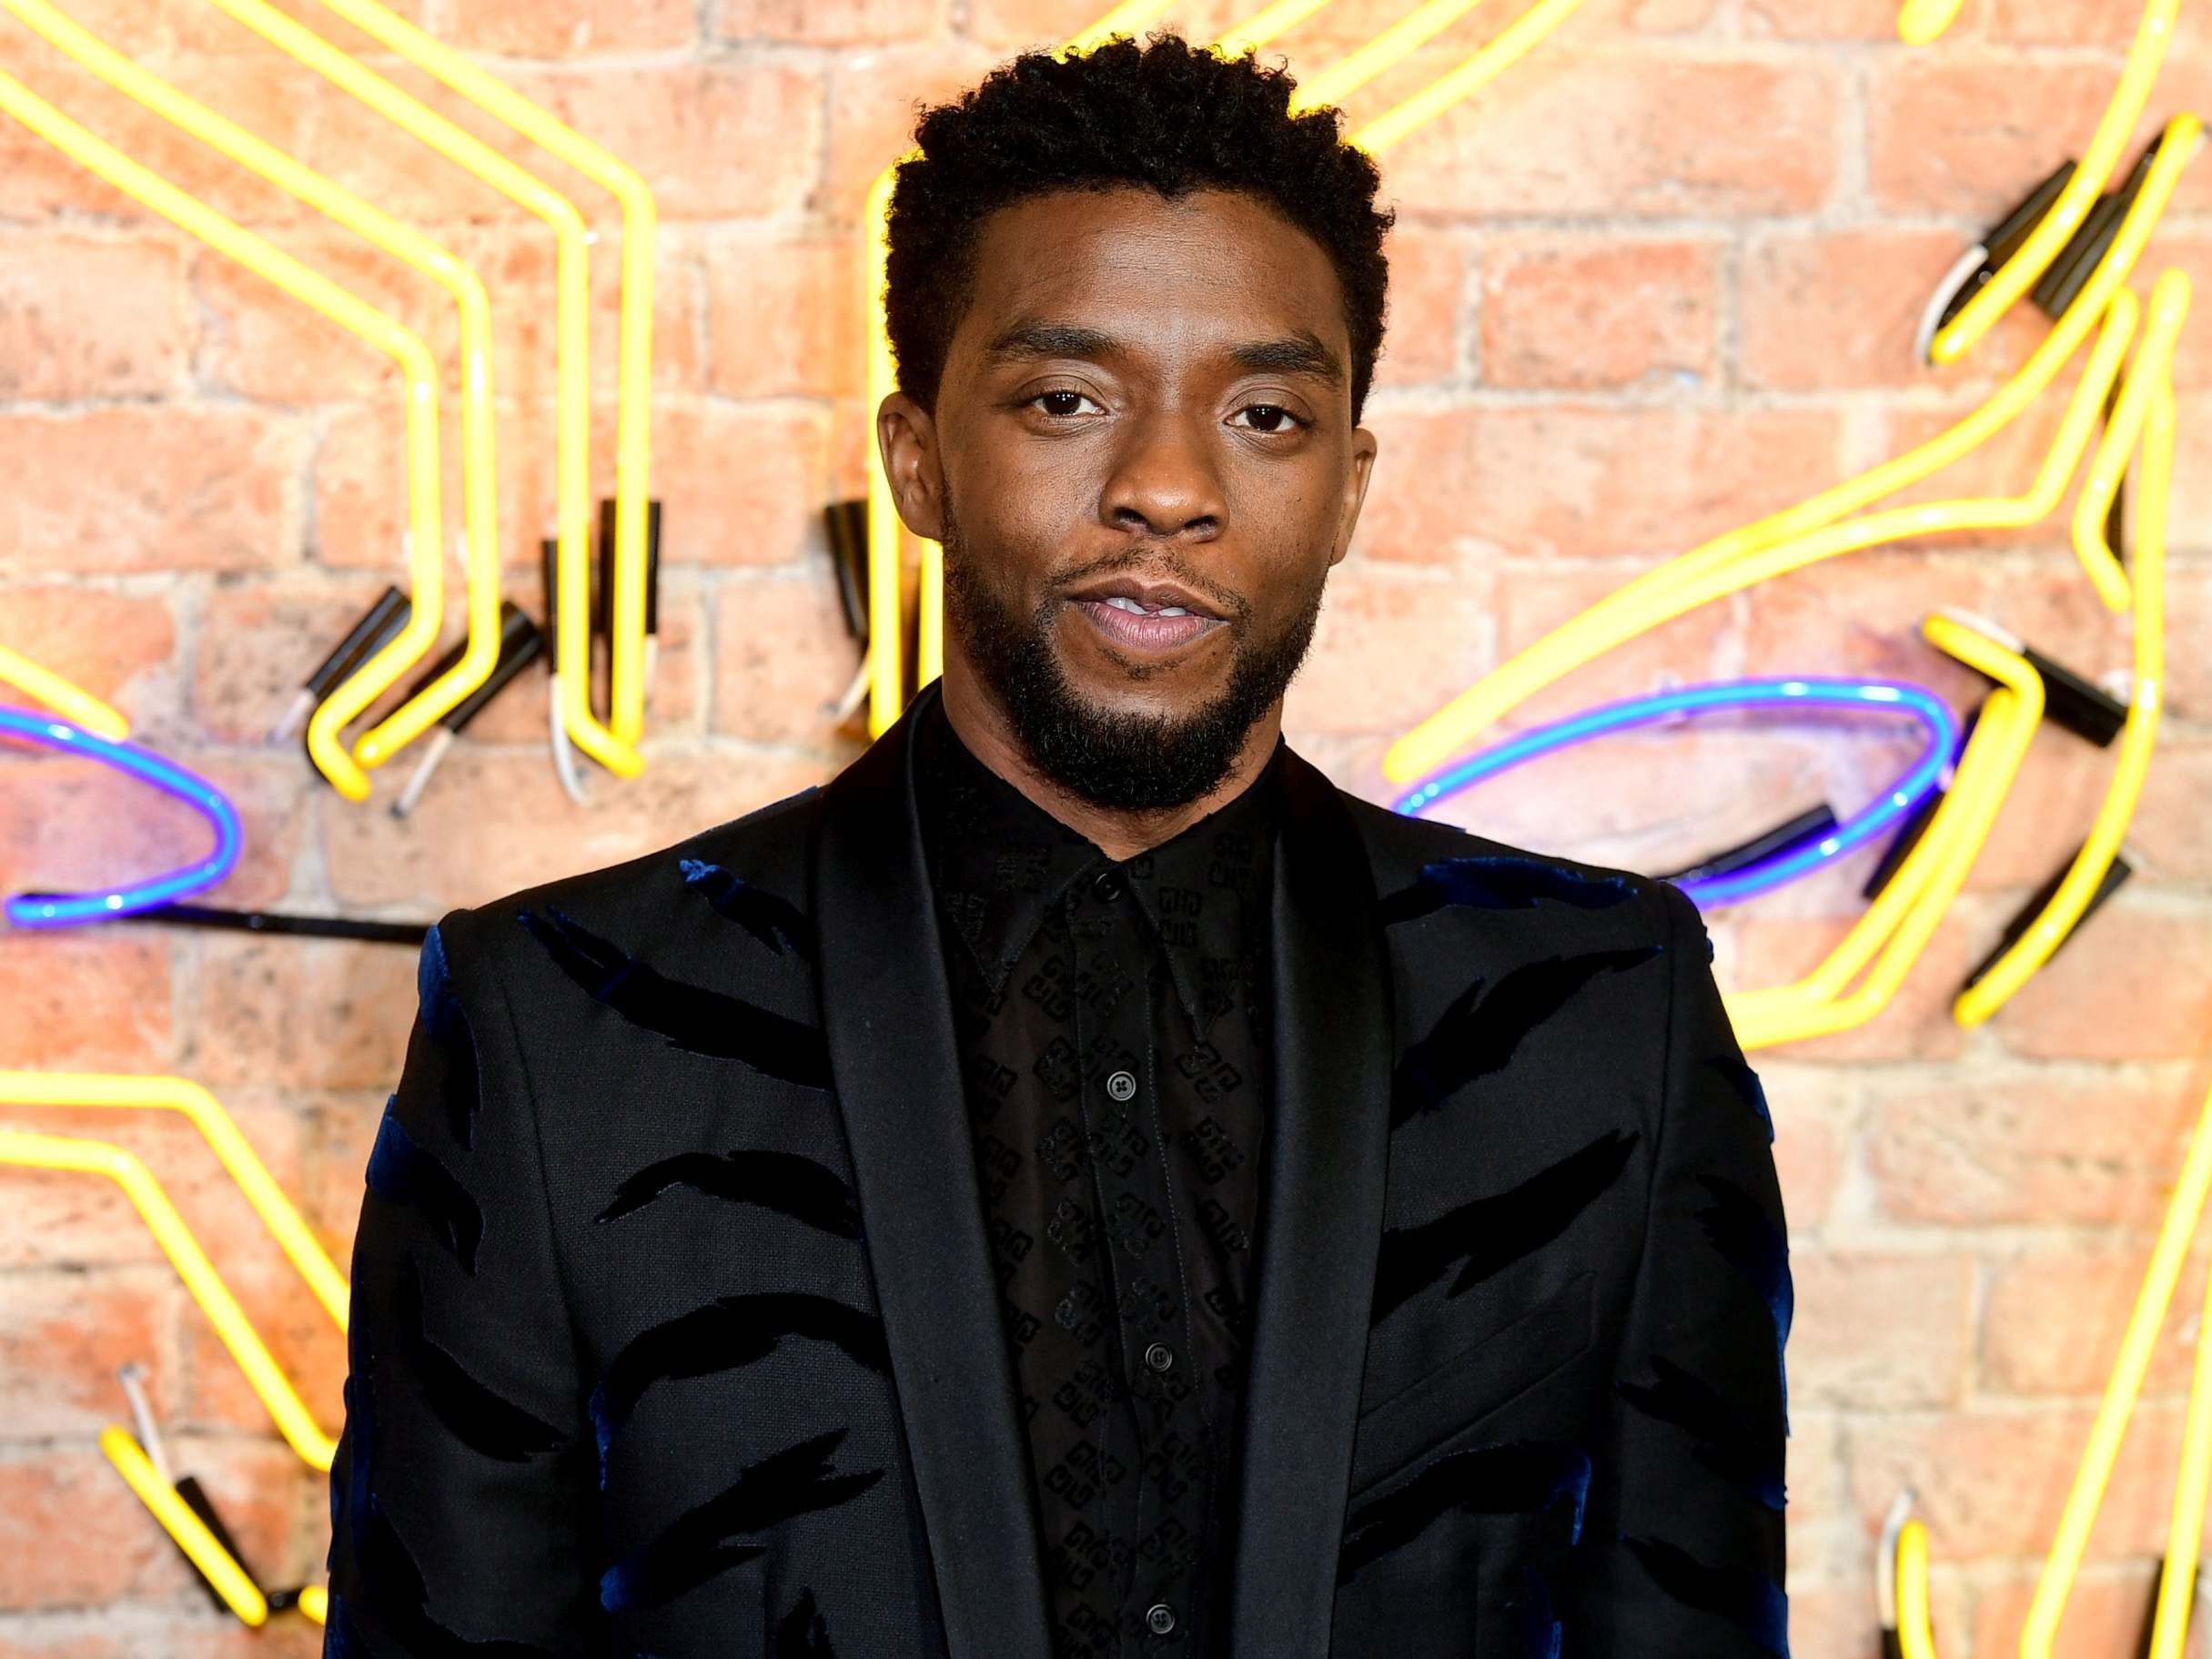 Boseman's acting career soared despite many surgeries and chemotherapy